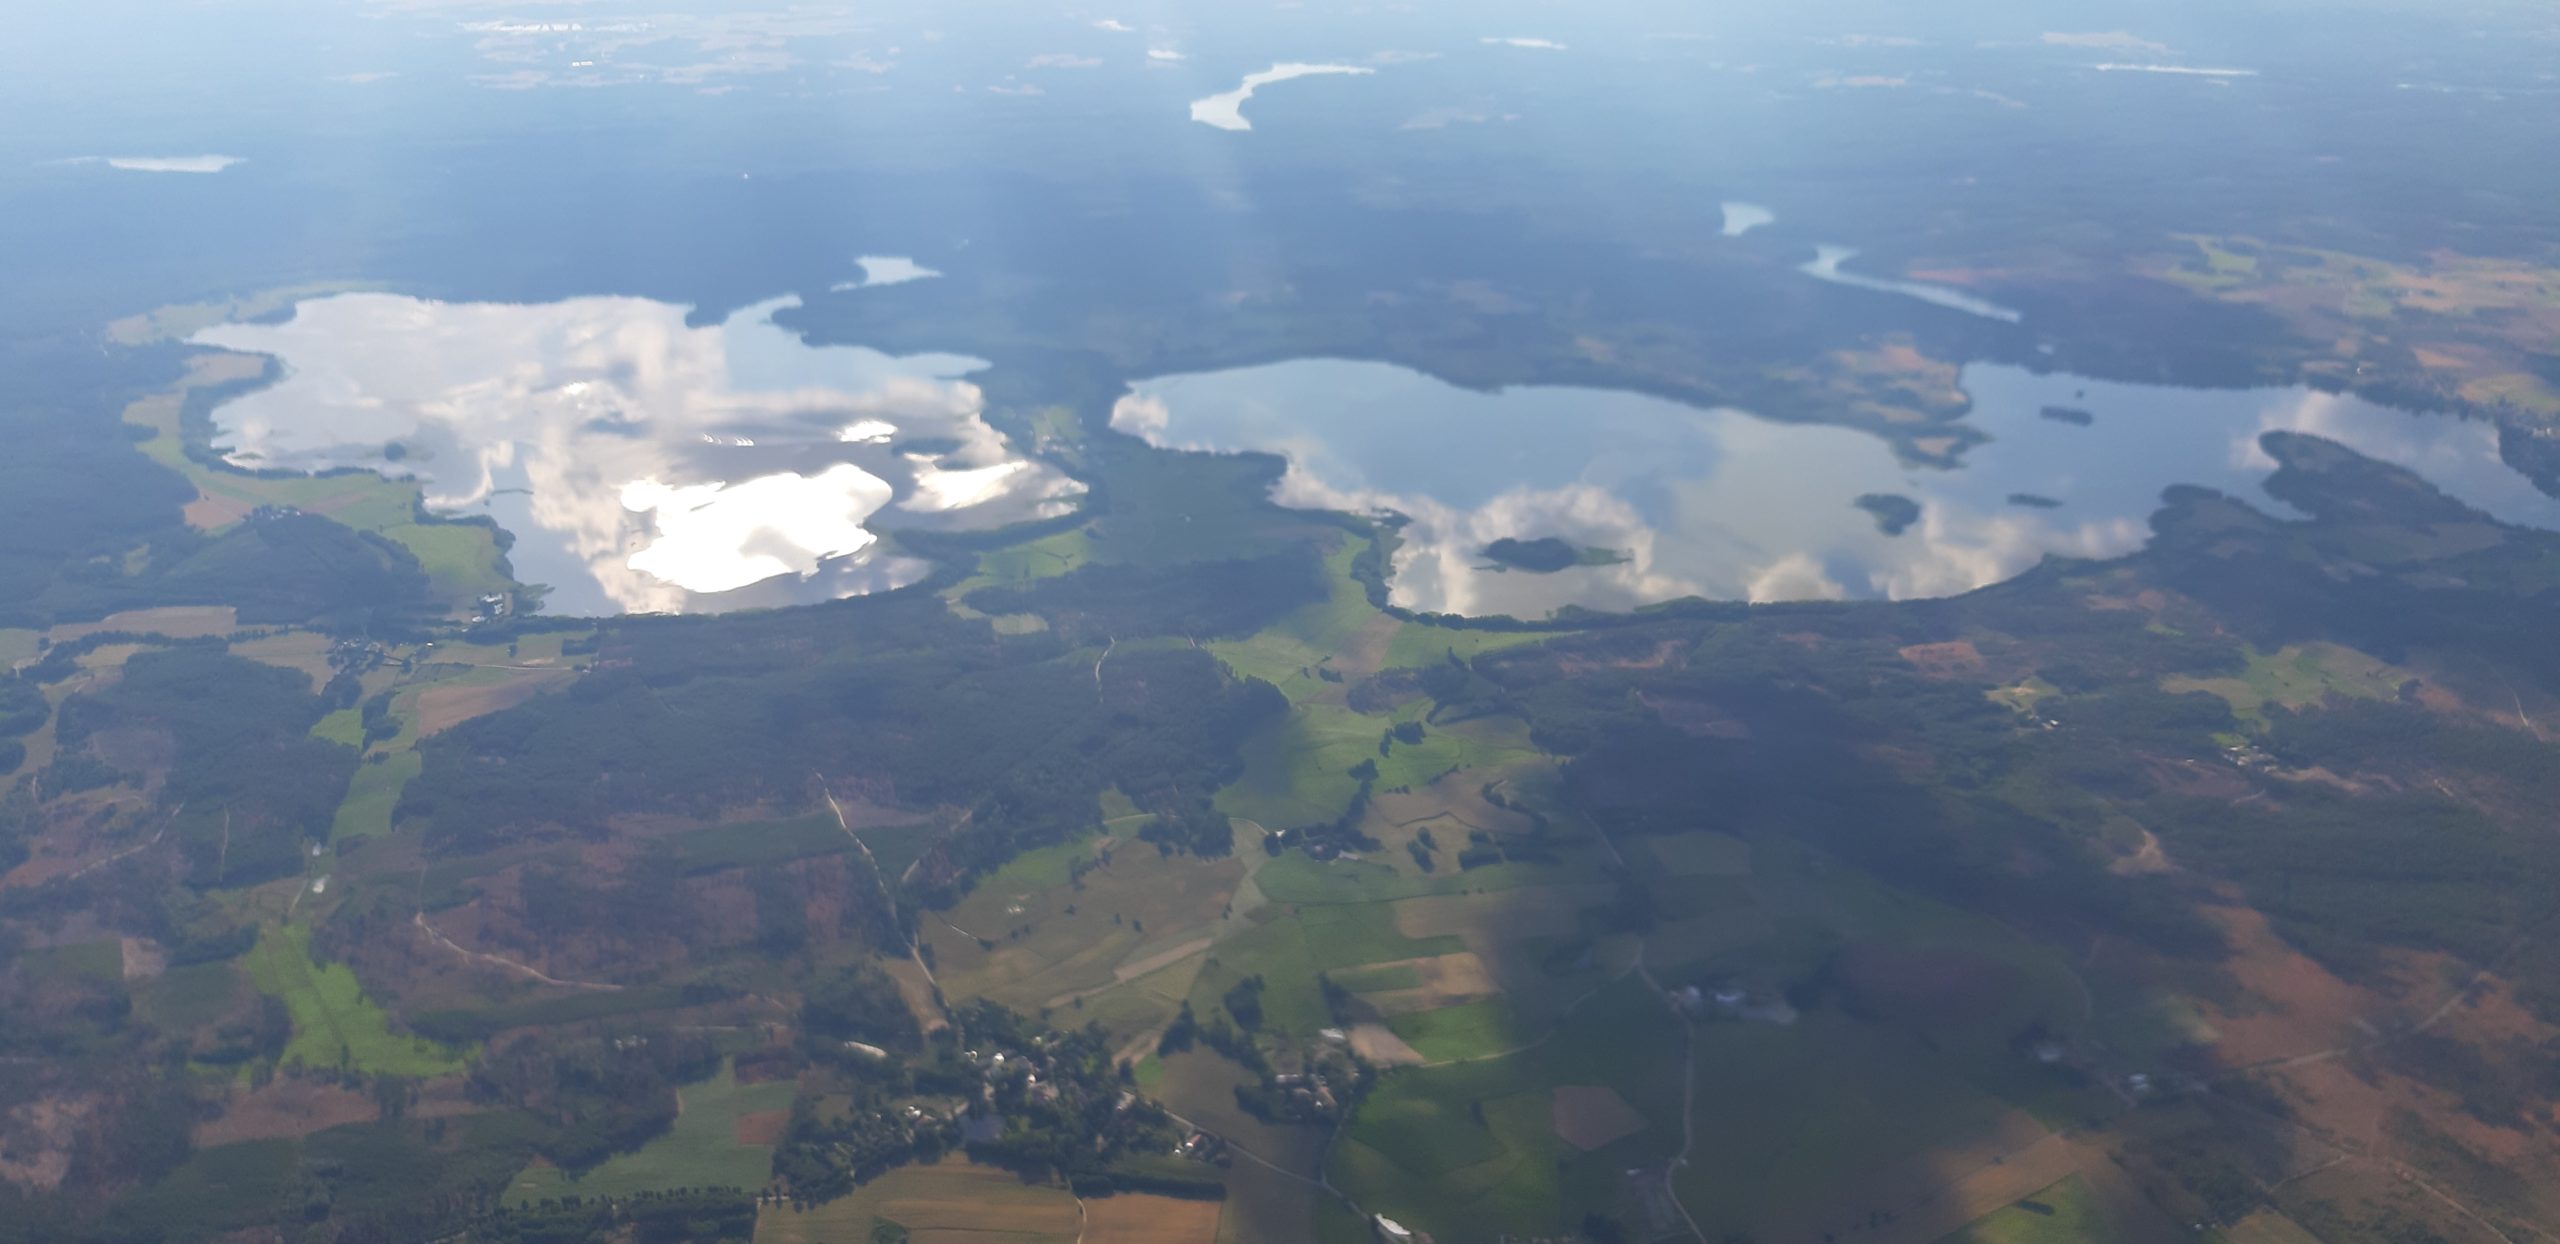 Look at Lake Somińskie and Lake Kruszyńskie from yet another angle